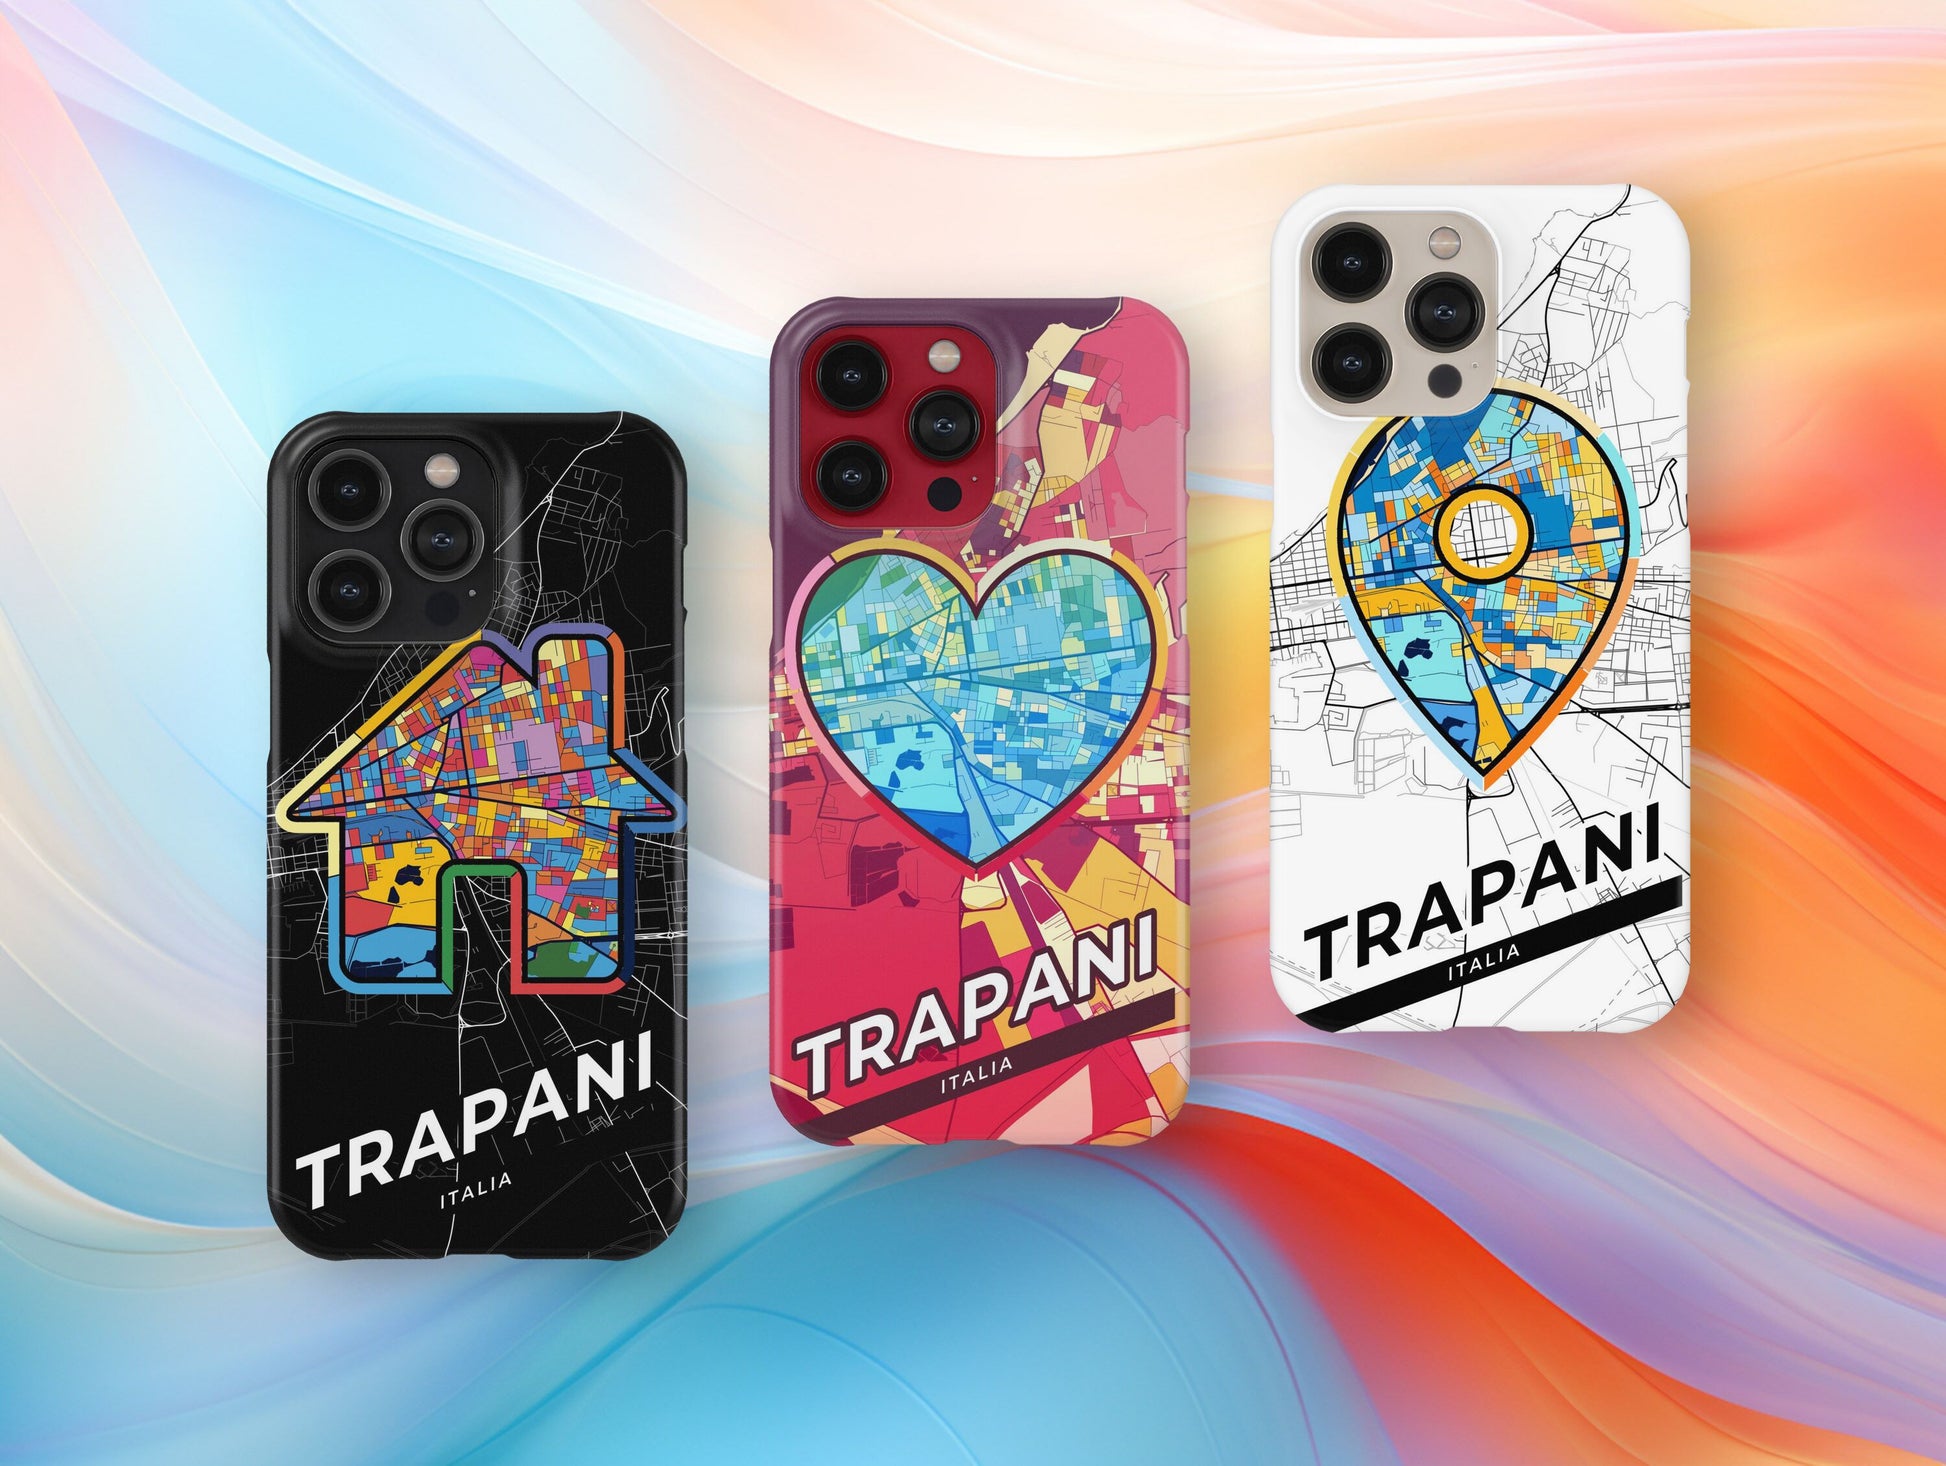 Trapani Italy slim phone case with colorful icon